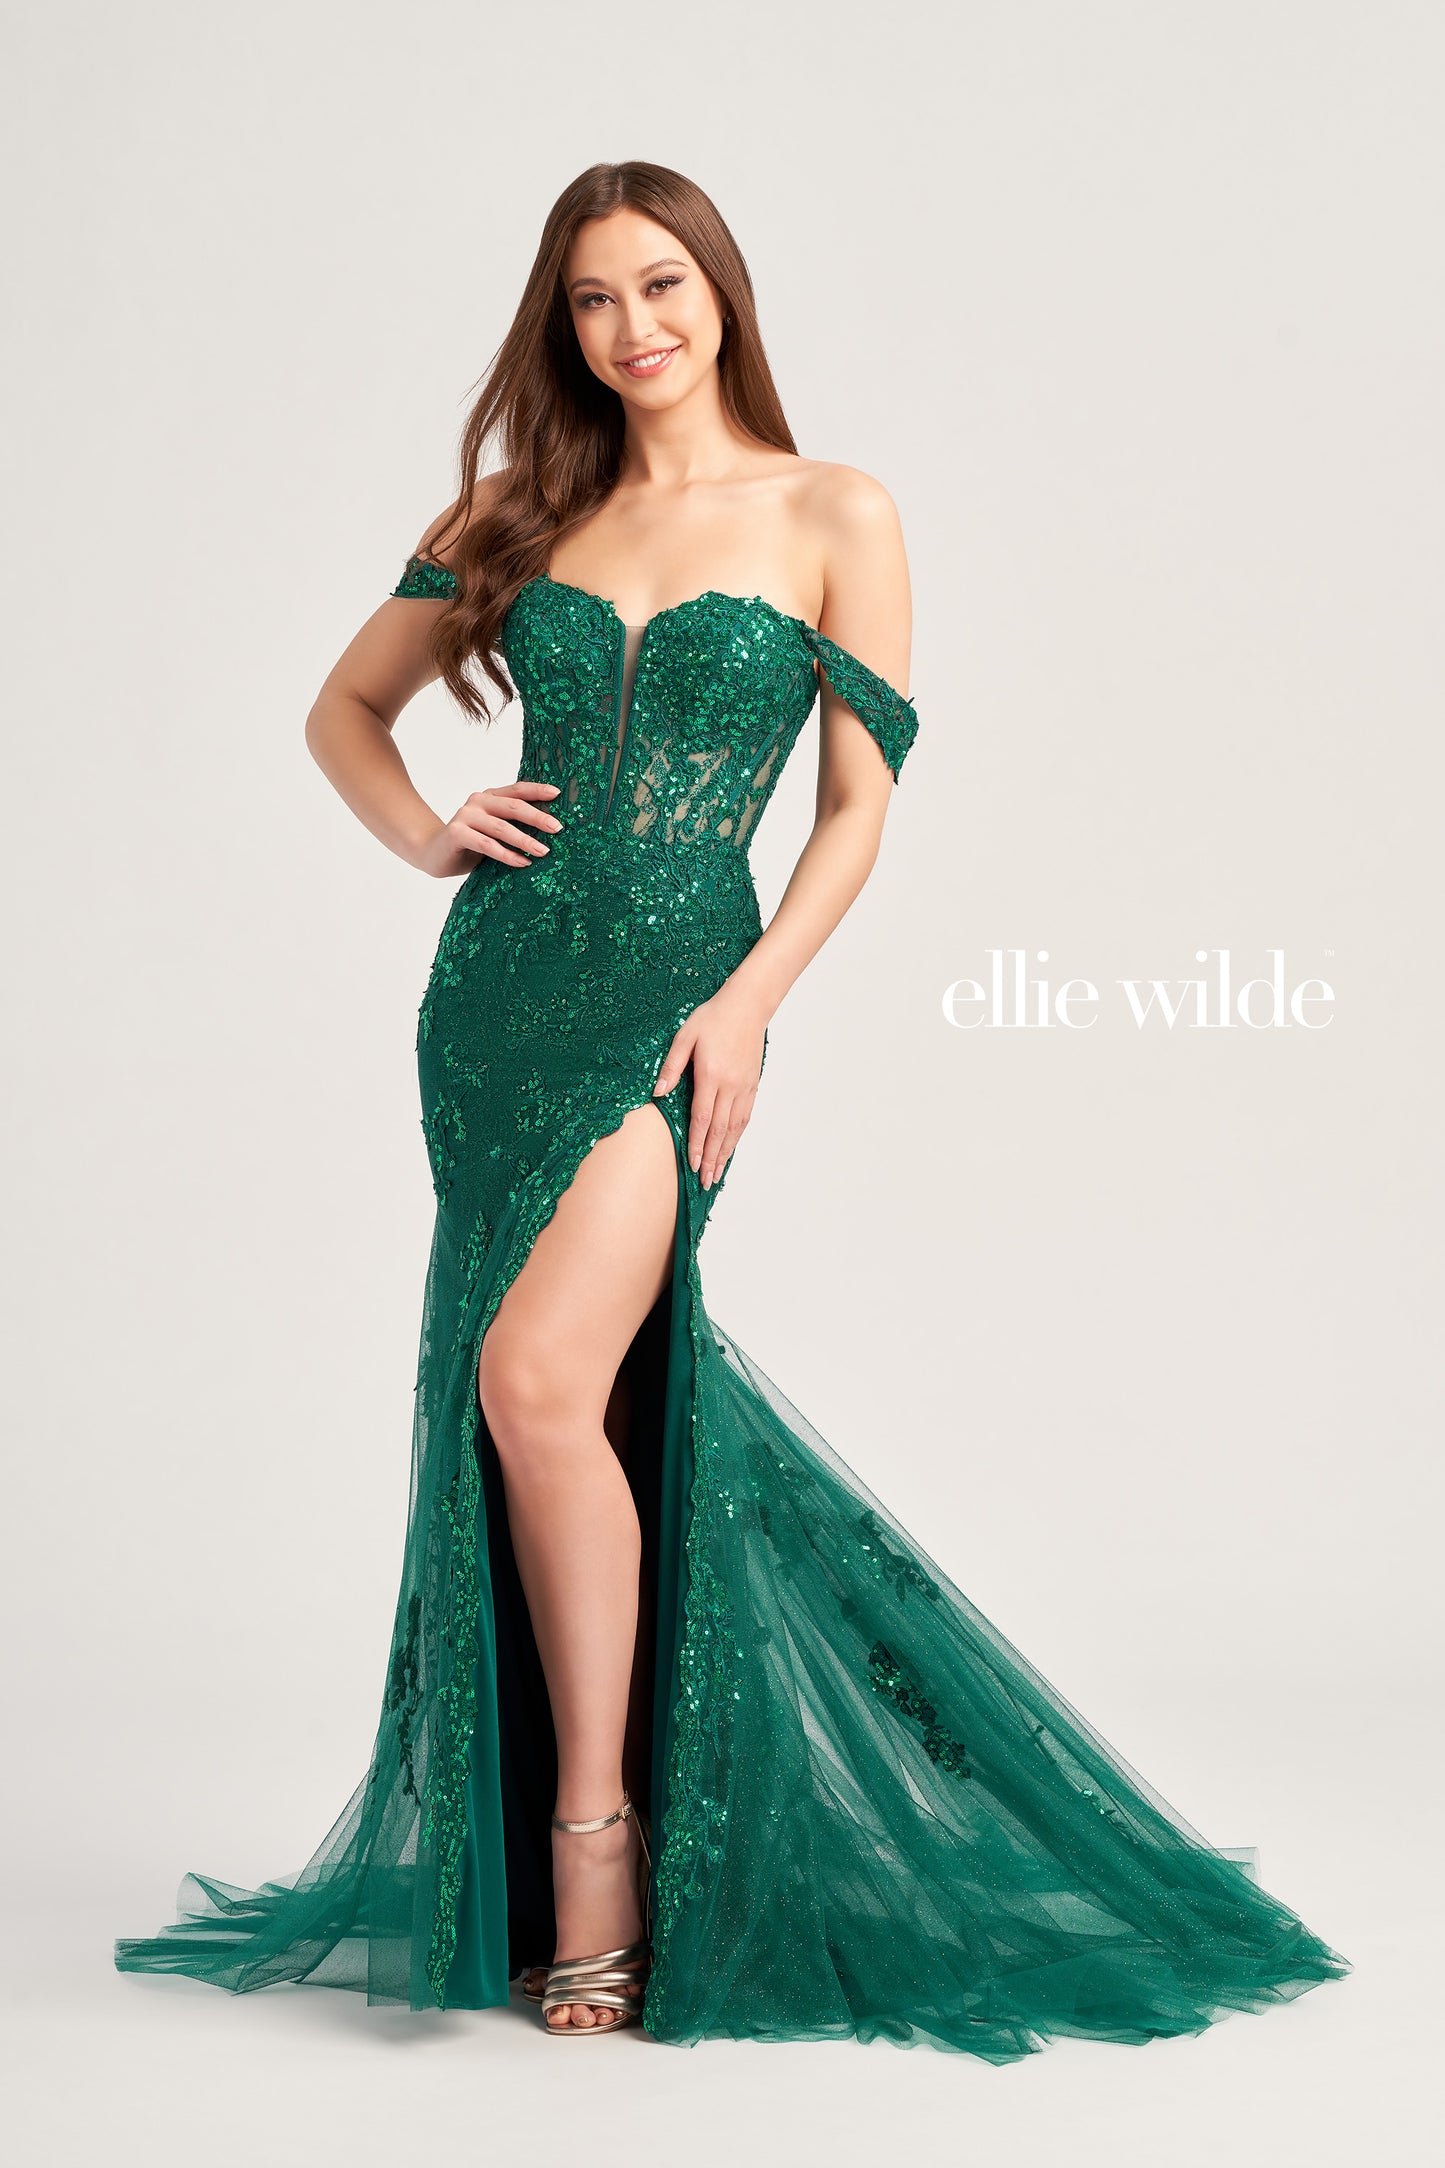 Make a big splash in this Ellie Wilde EW35082 Sheer Sequin Corset Shimmer Prom Dress. Featuring a sheer corset bodice, fit and flare silhouette and mermaid skirt with high slit, this show-stopping design is sure to turn heads. Detachable draped shoulder straps, sweetheart neckline and sequin fabric complete this glamorous look. Exquisite lace appliques and glitter tulle with separate spaghetti straps add the perfect touch.  COLOR: RED, MIDNIGHT, EMERALD, LILAC SIZE: 00 - 16